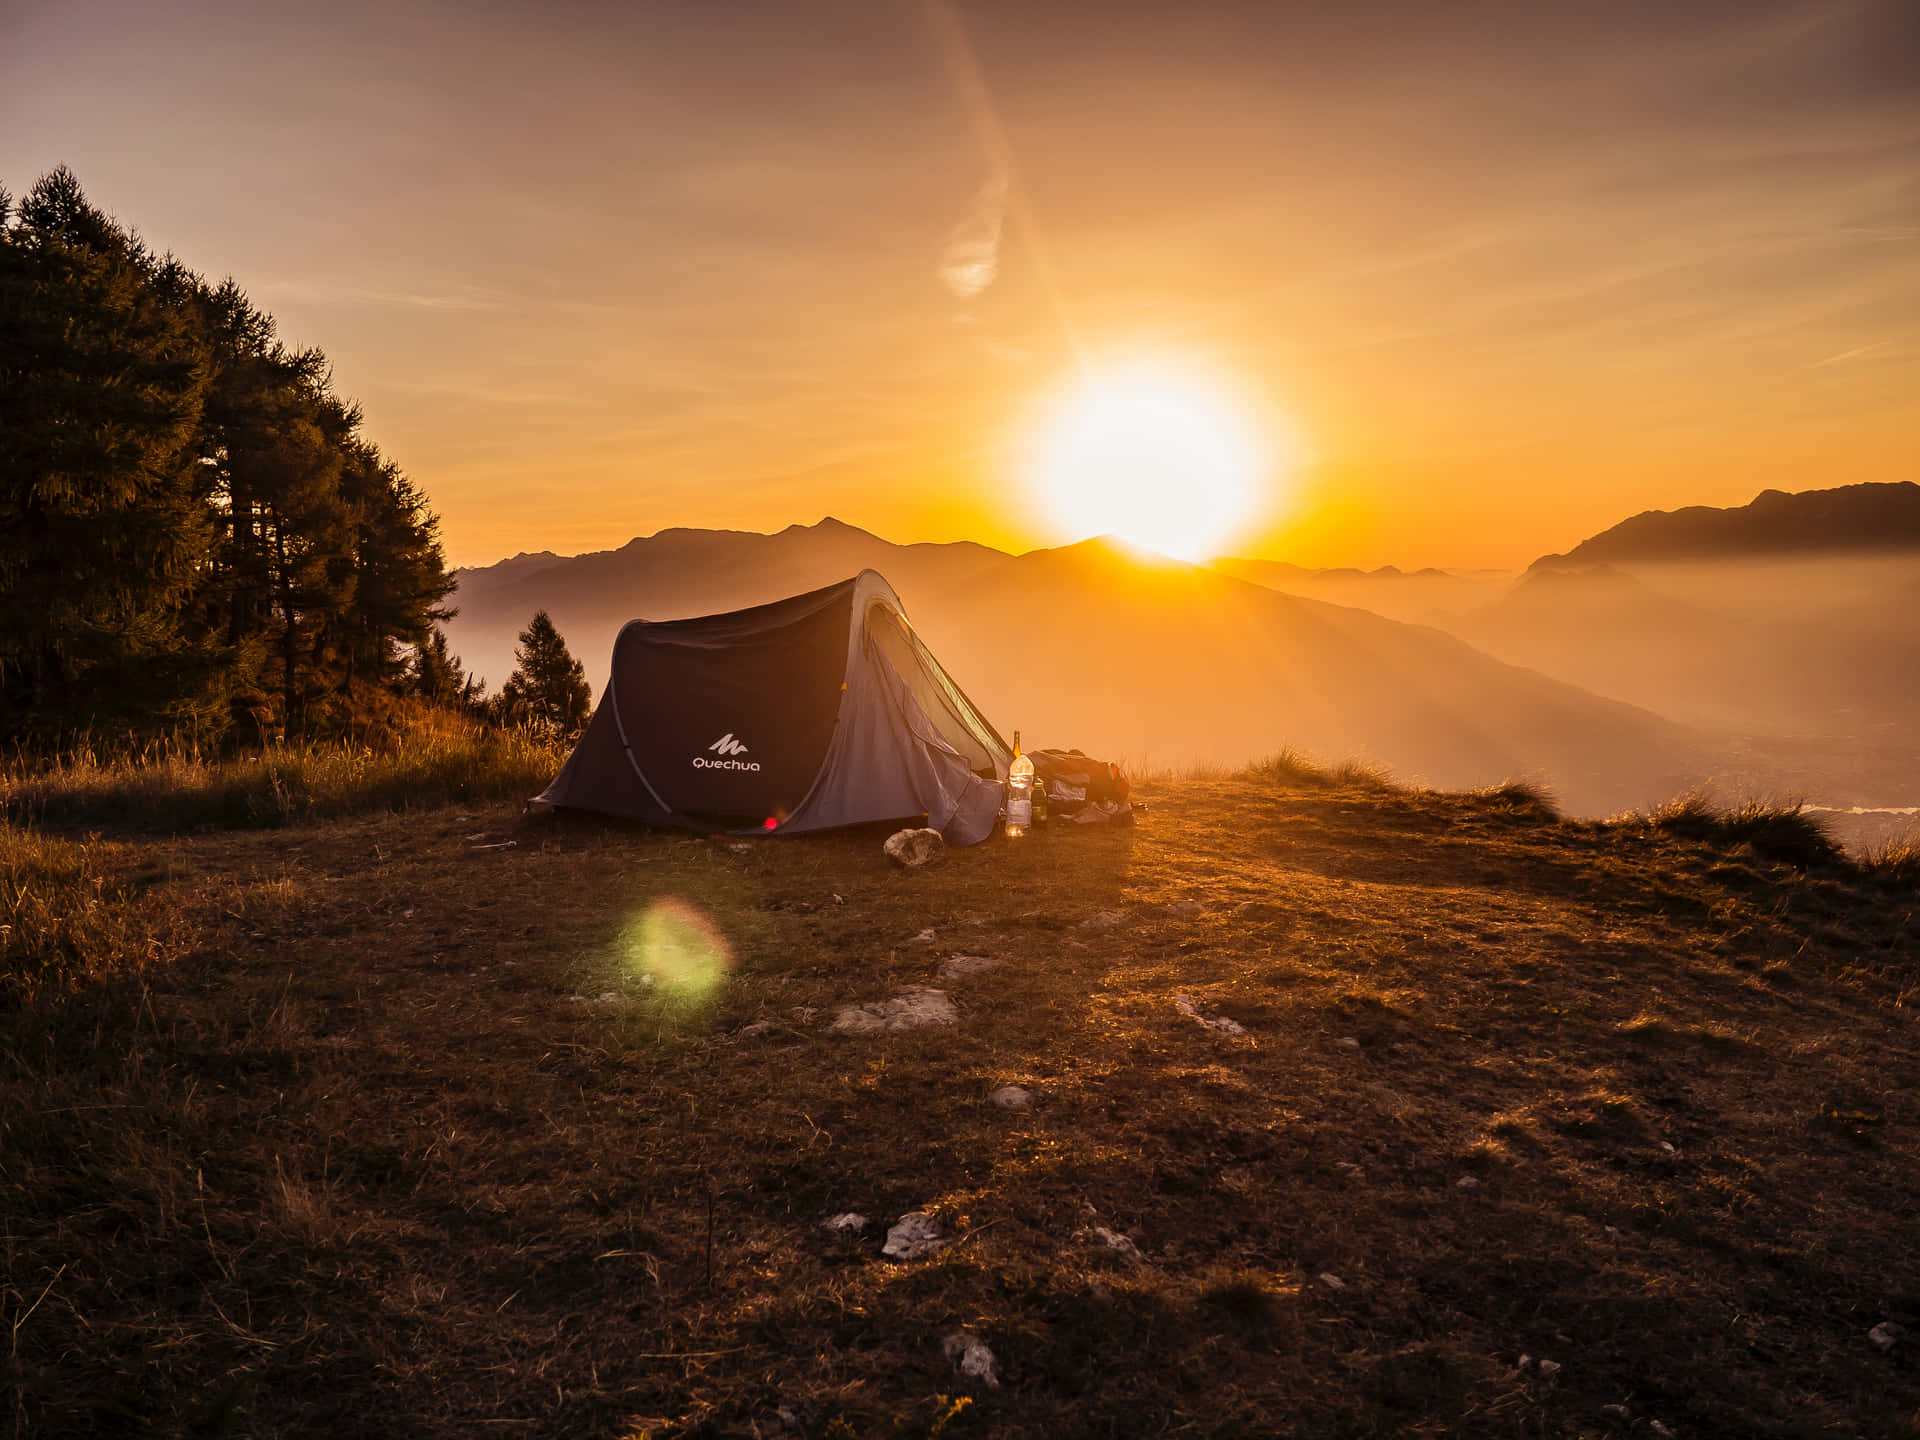 "Escape from the hustle of city life and spend a relaxing camping night under the stars."